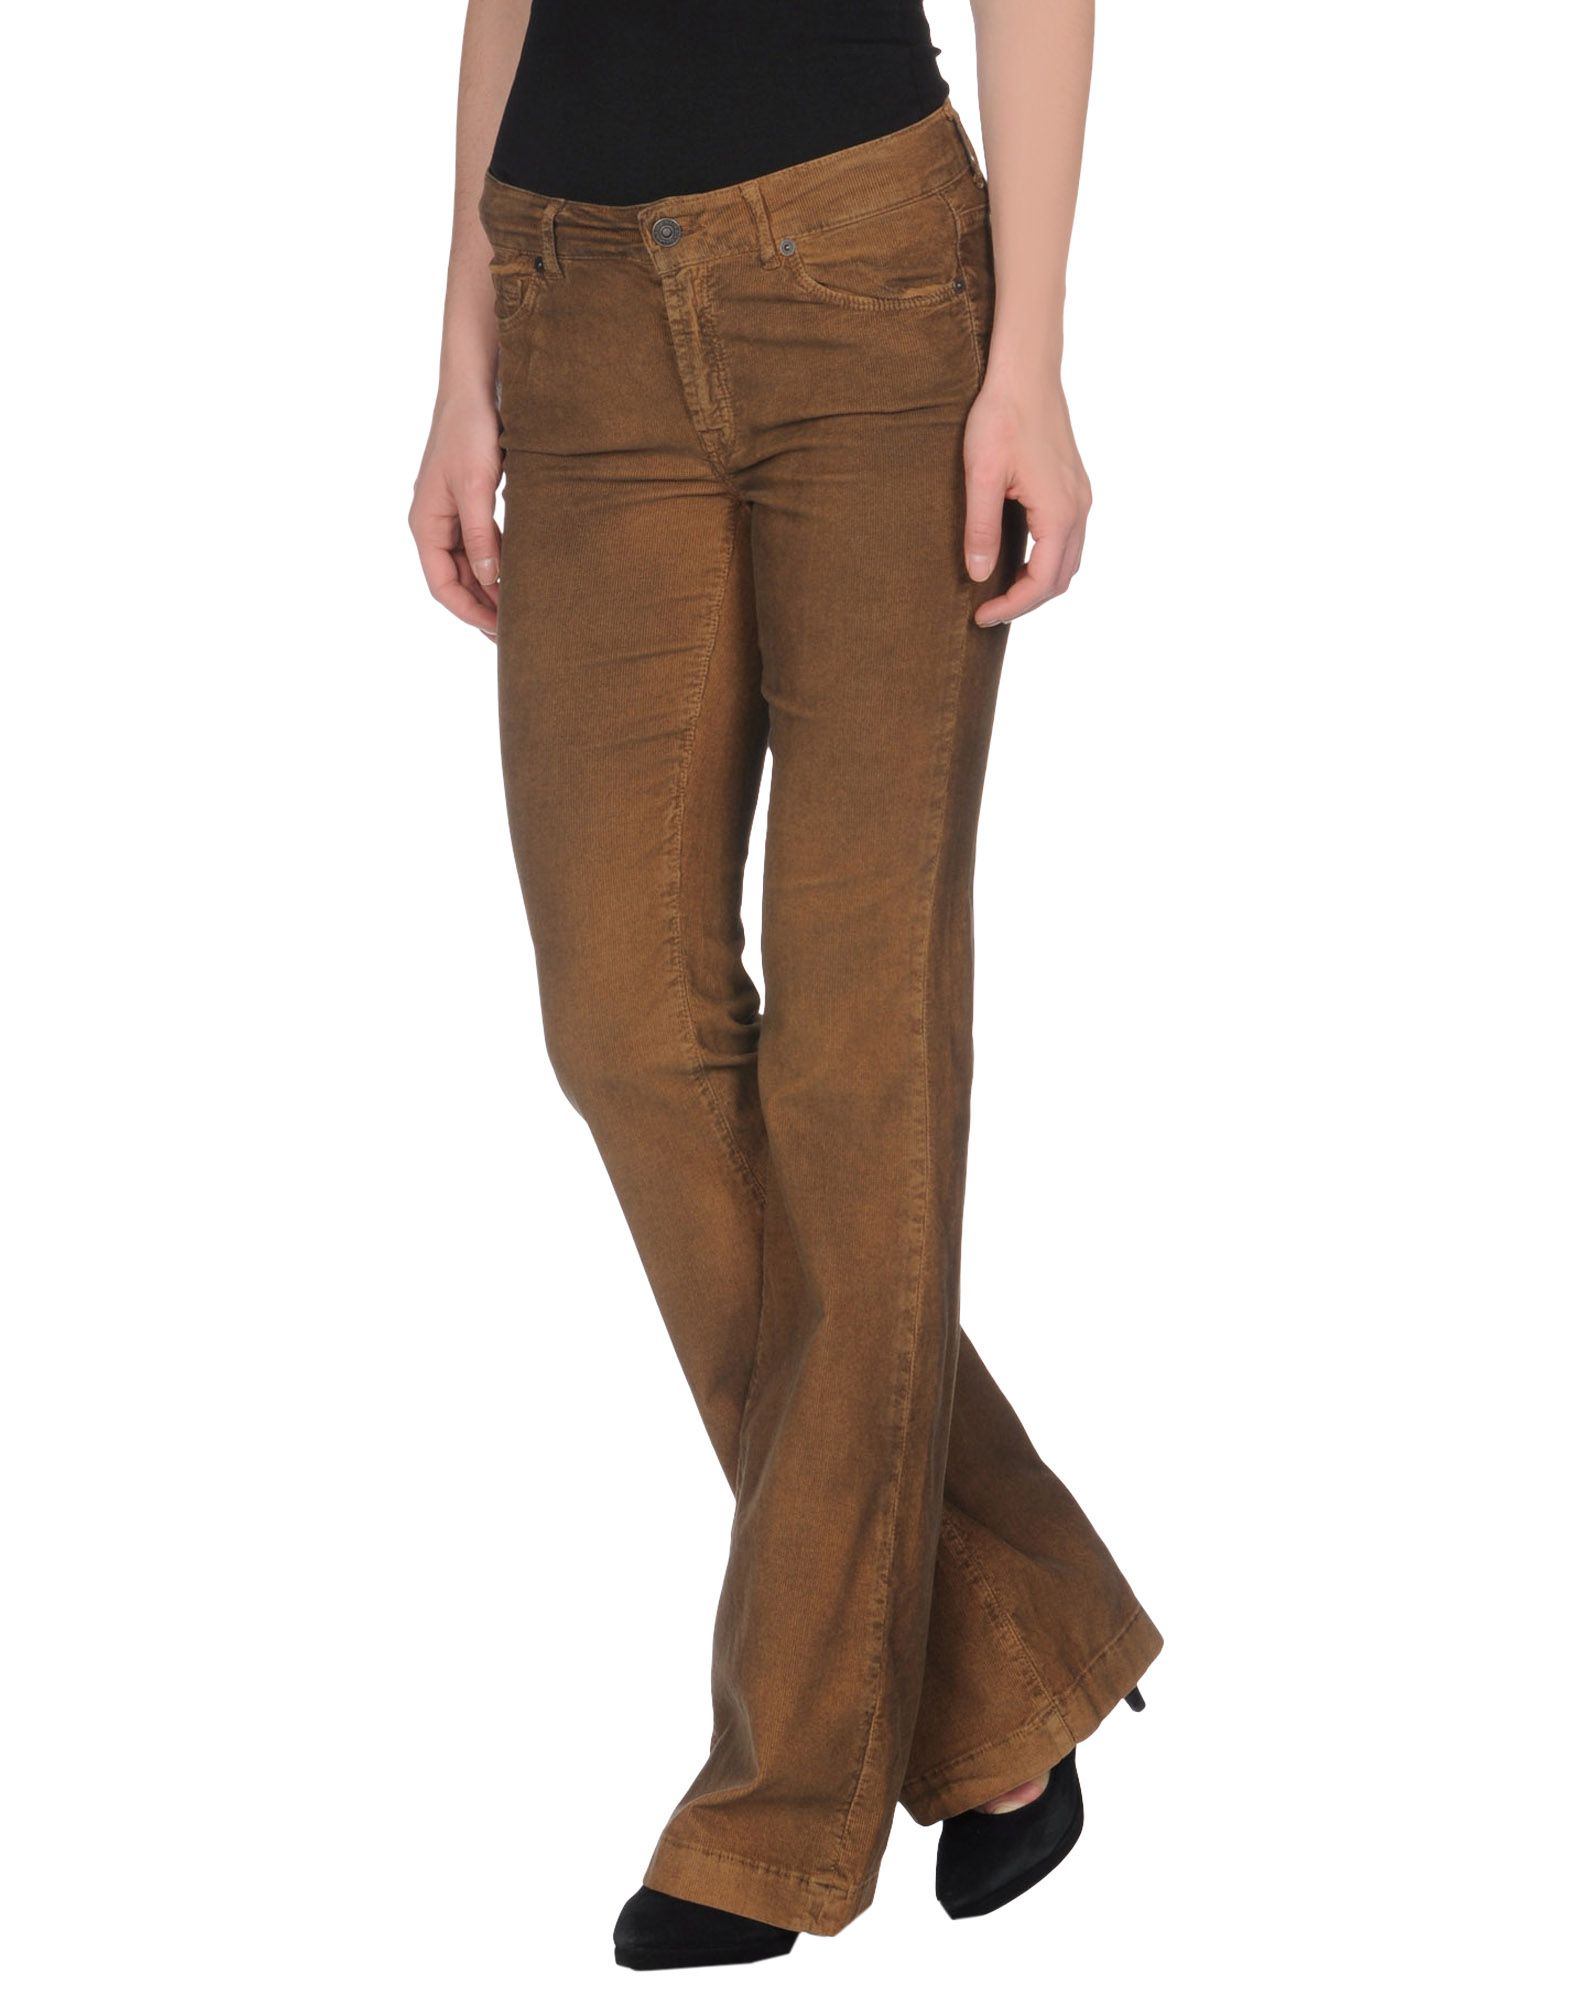 Foto 7 For All Mankind Pantalones Mujer Caqui